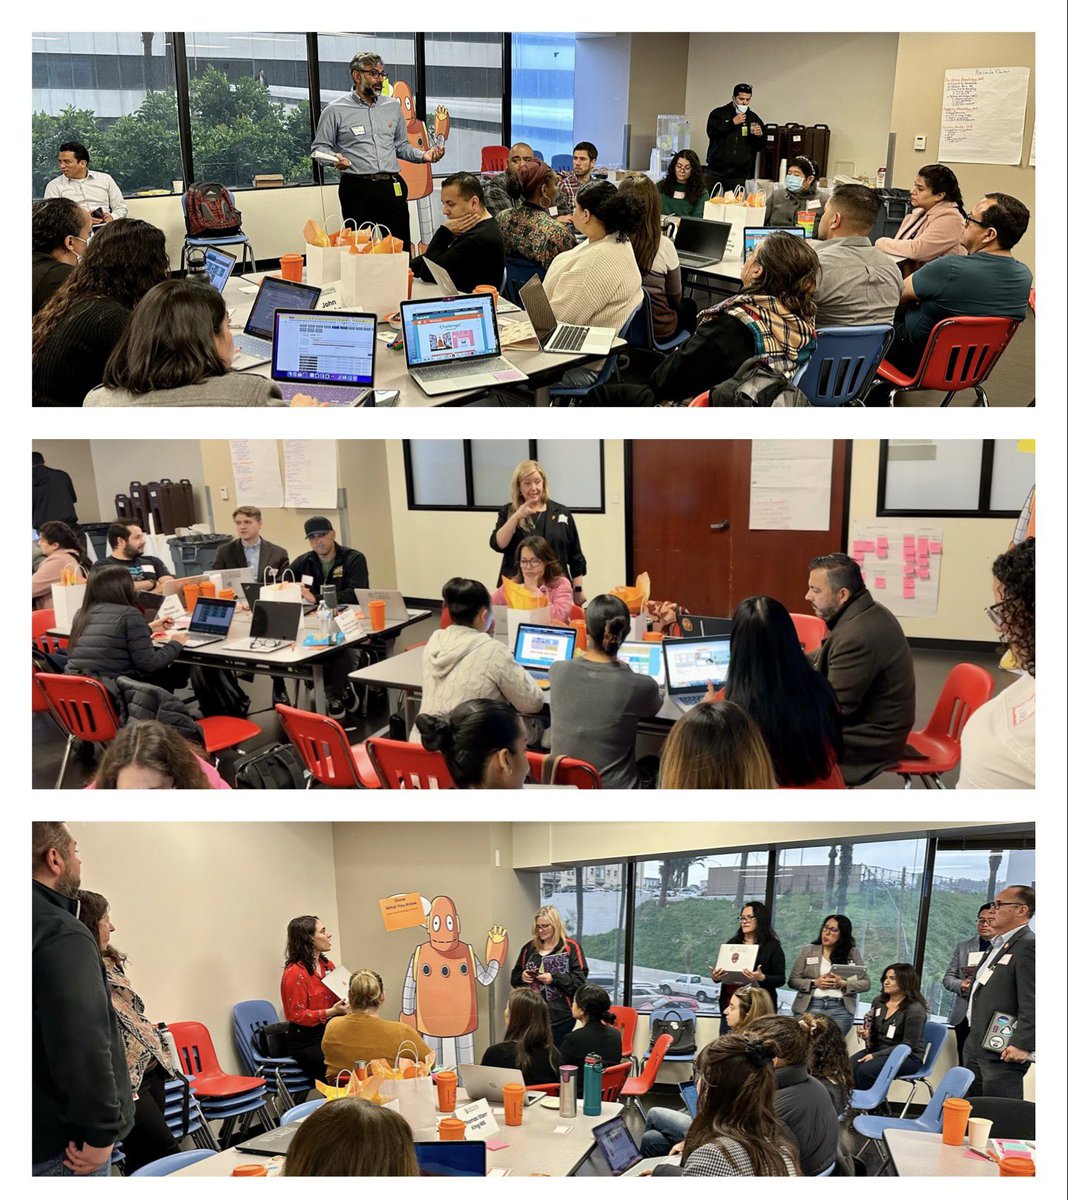 A successful and full day of learning with our practitioner schools! The Empowered Learner teams spent the day building, assessing and applying knowledge and skills for future ready learning with digital tools to meet the @LASchools District Goals! #PS7LAUSD #EmpoweredByITI